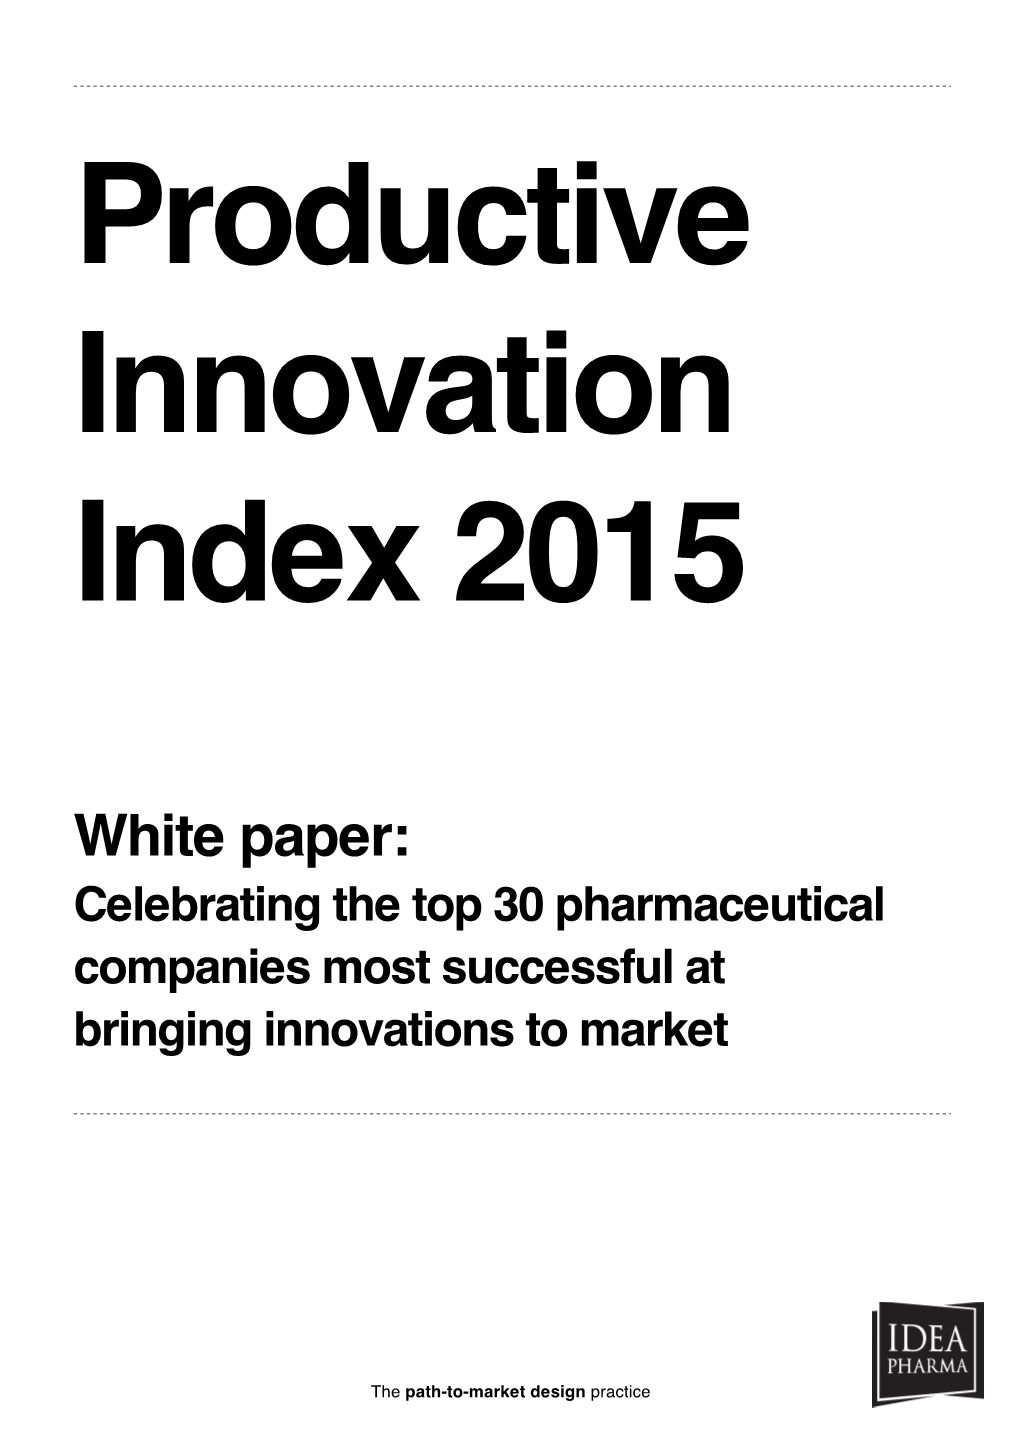 Productive Innovation Index 2015 White Paper